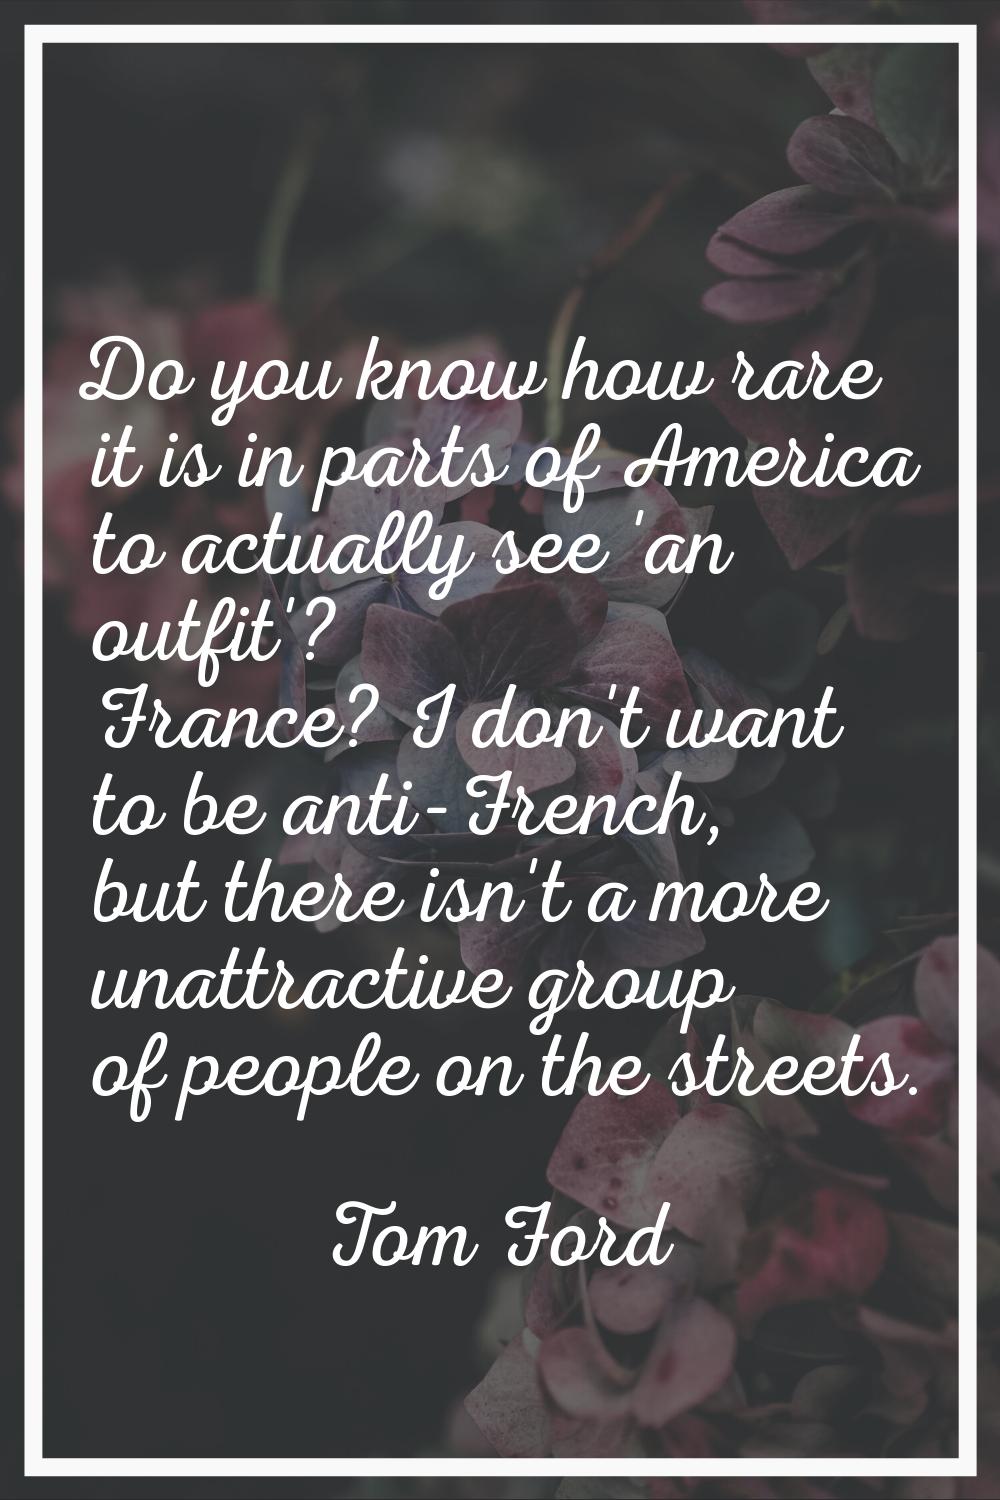 Do you know how rare it is in parts of America to actually see 'an outfit'? France? I don't want to